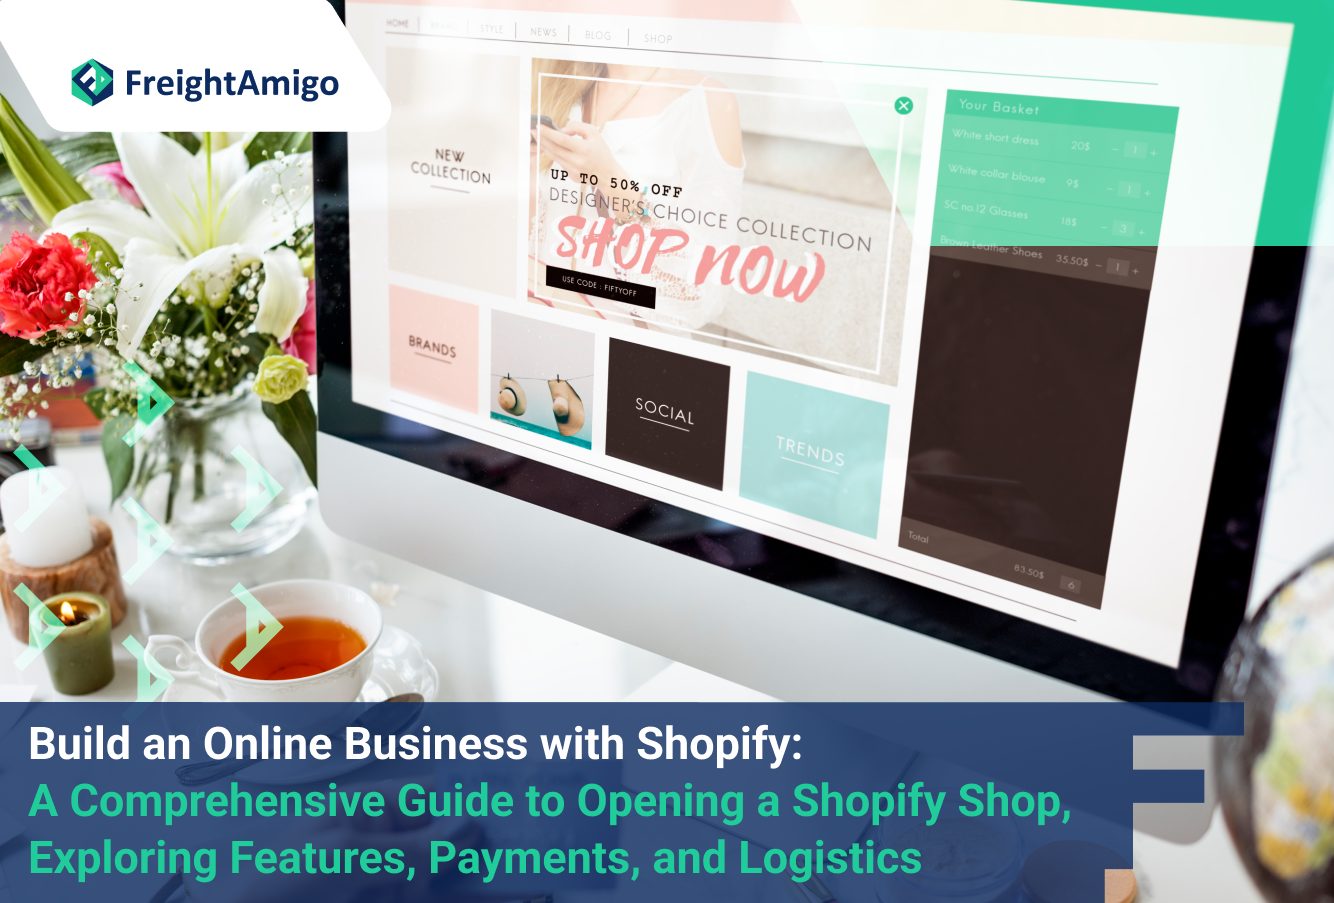 Build an Online Business with Shopify: A Comprehensive Guide to Opening a Shopify Shop, Exploring Features, Payments, and Logistics